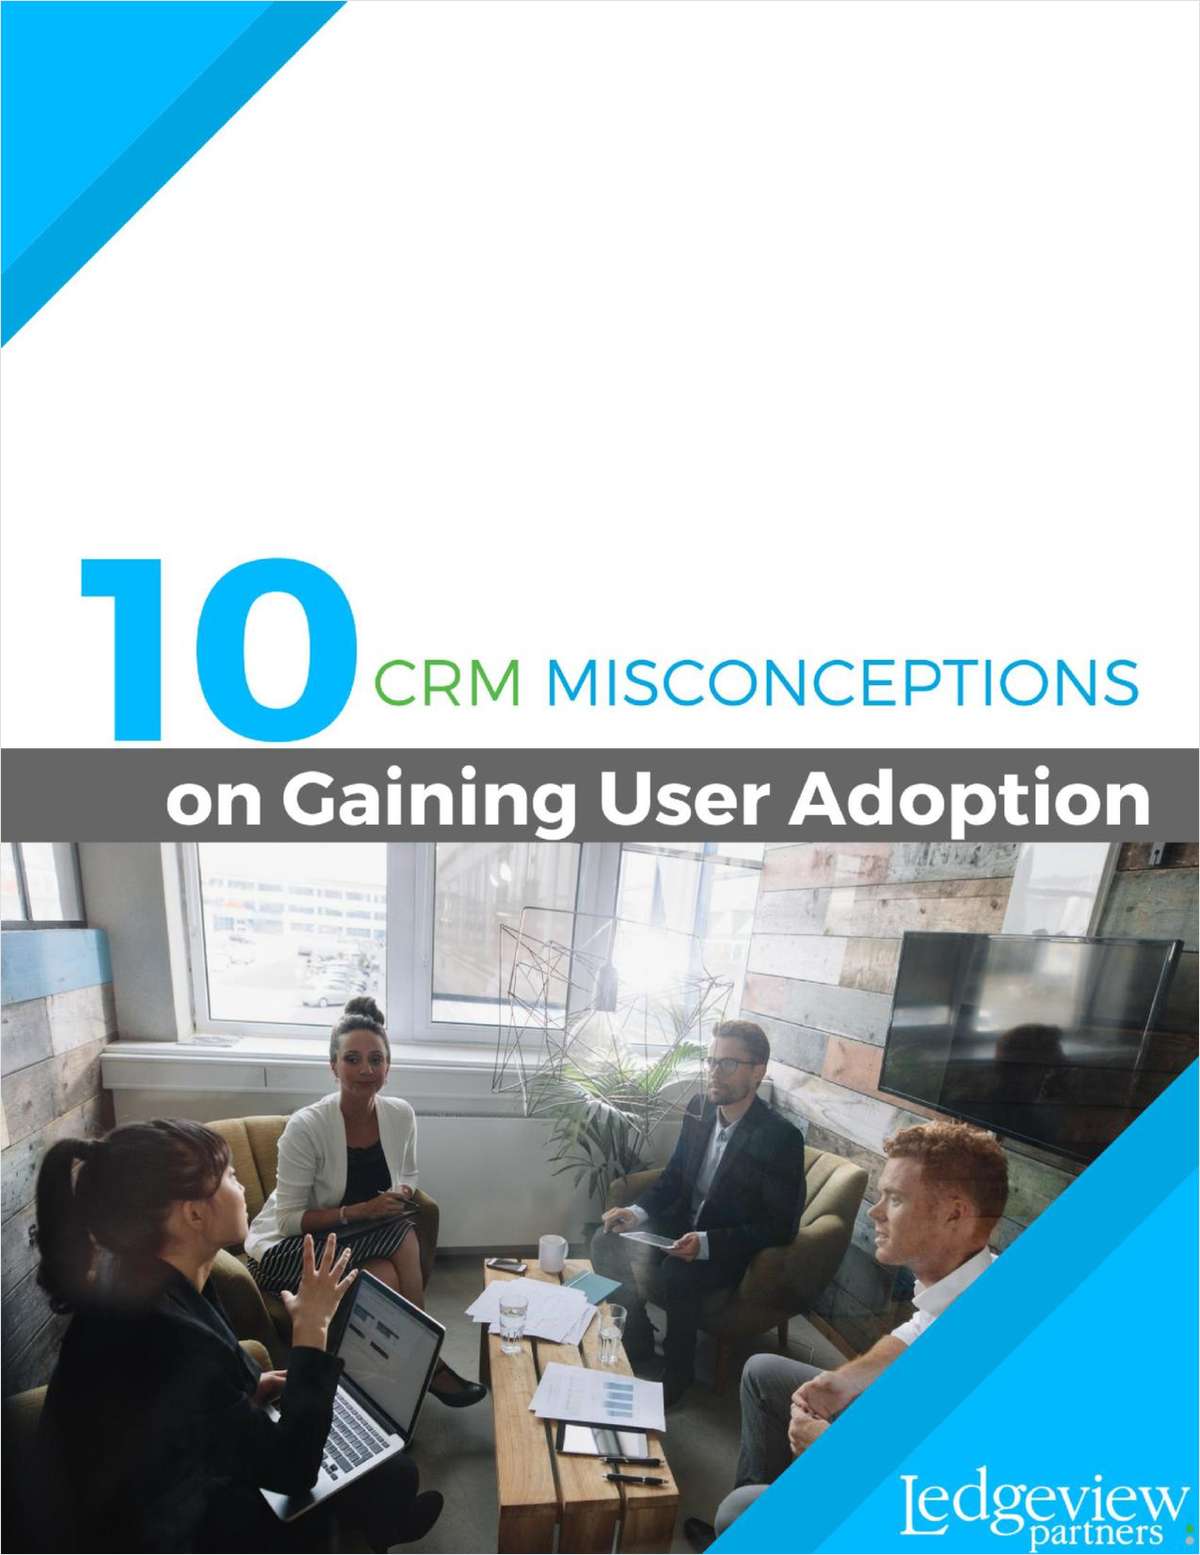 10 CRM Misconceptions on Gaining User Adoption